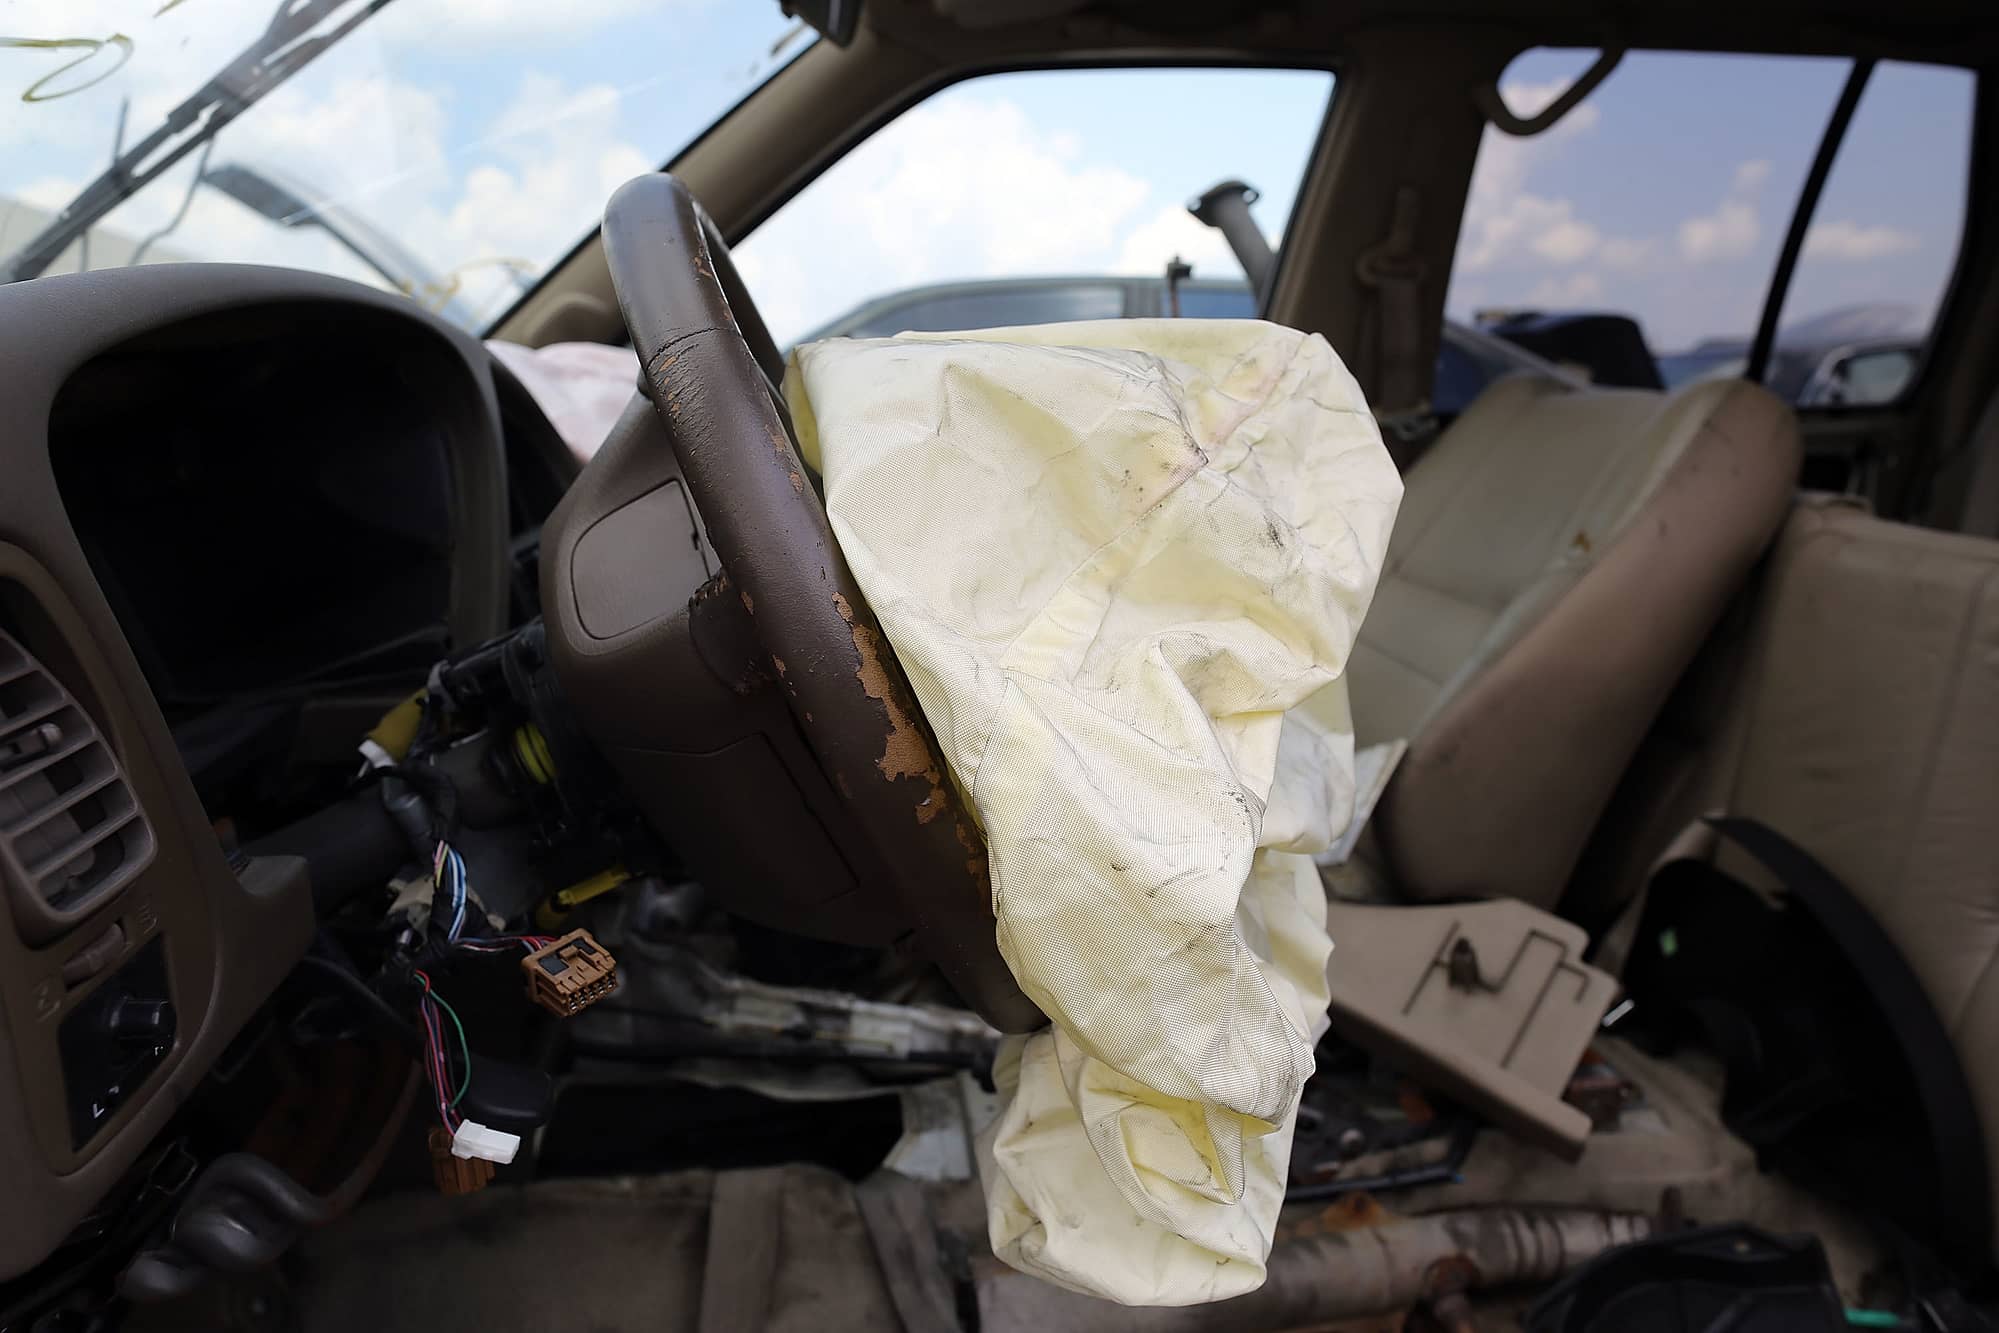 MEDLEY, FL - MAY 22:  A deployed airbag is seen in a Nissan vehicle at the LKQ Pick Your Part salvage yard on May 22, 2015 in Medley, Florida. The largest automotive recall in history centers around the defective Takata Corp. air bags that are found in millions of vehicles that are manufactured by BMW, Chrysler, Daimler Trucks, Ford, General Motors, Honda, Mazda, Mitsubishi, Nissan, Subaru and Toyota.  (Photo by Joe Raedle/Getty Images)